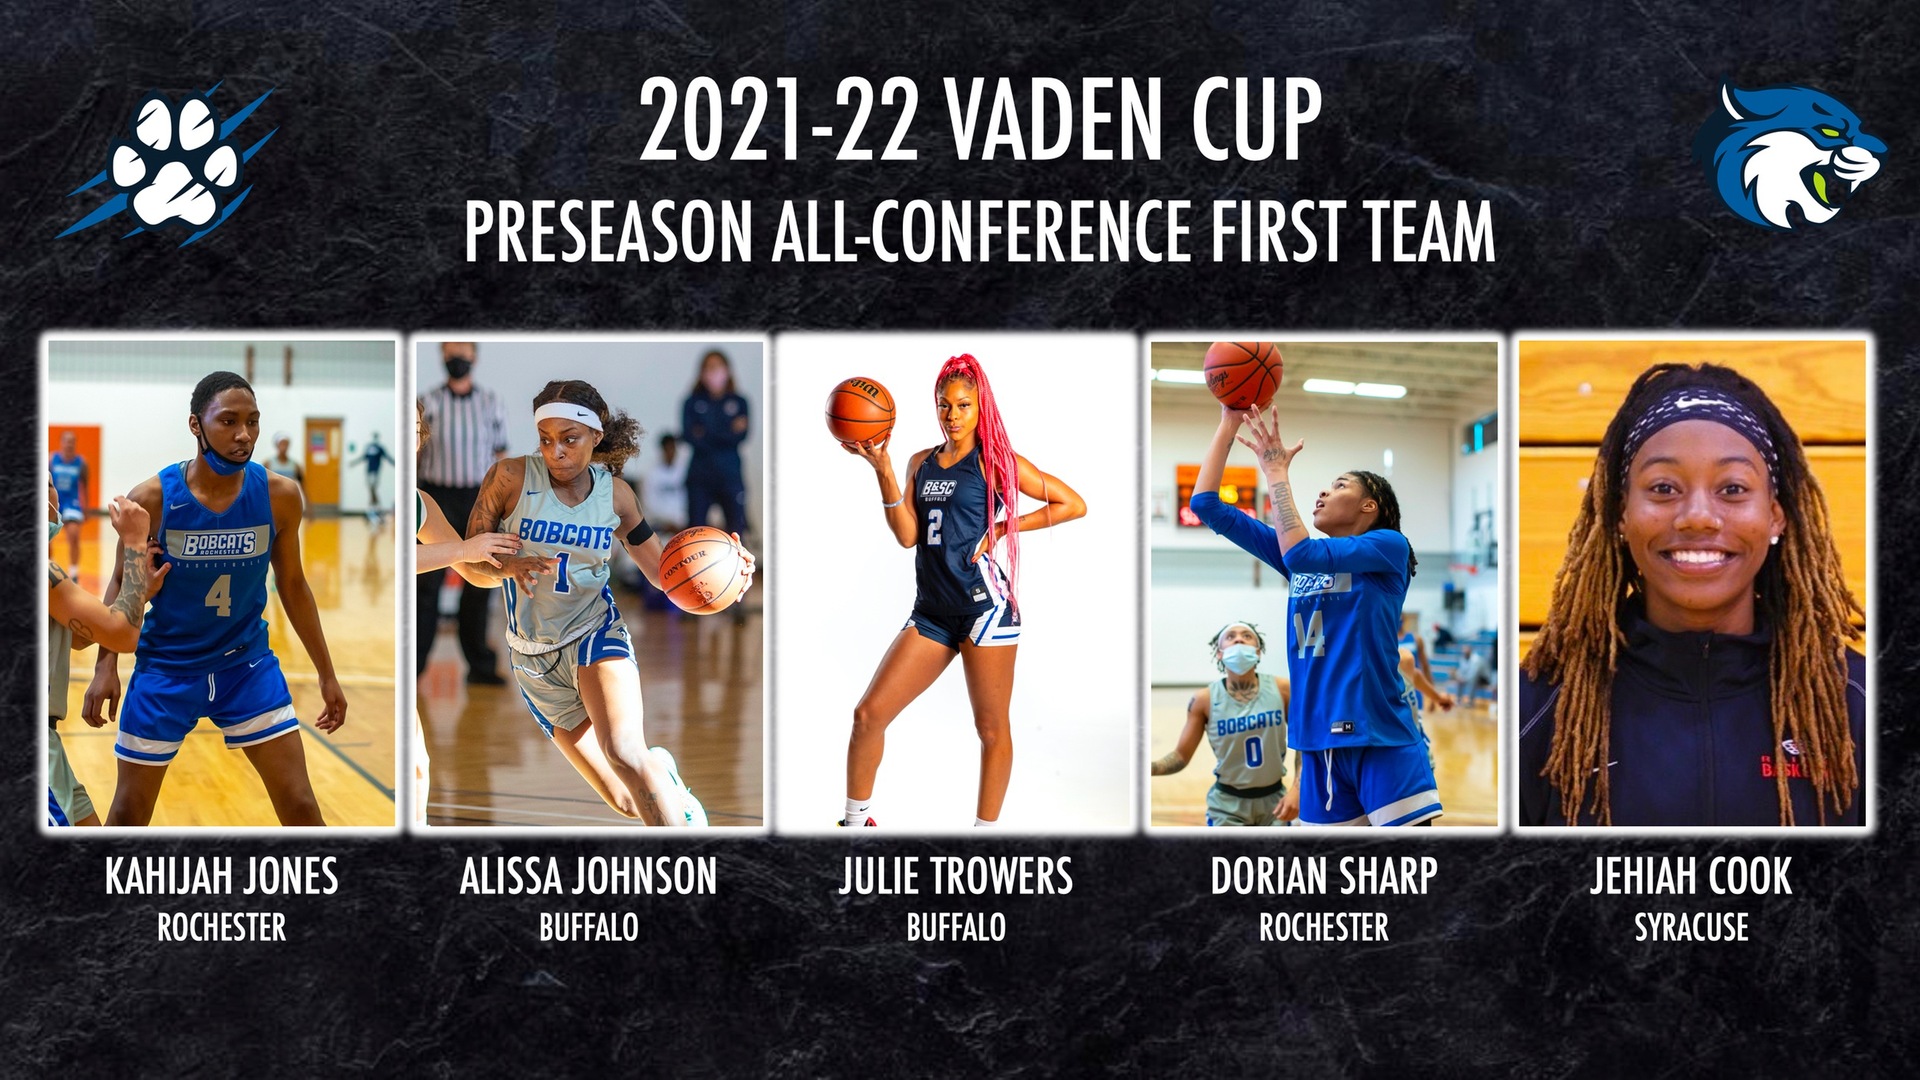 Rochester Men's and Women's Basketball Honored with Vaden Cup Preseason Honors Thumbnail